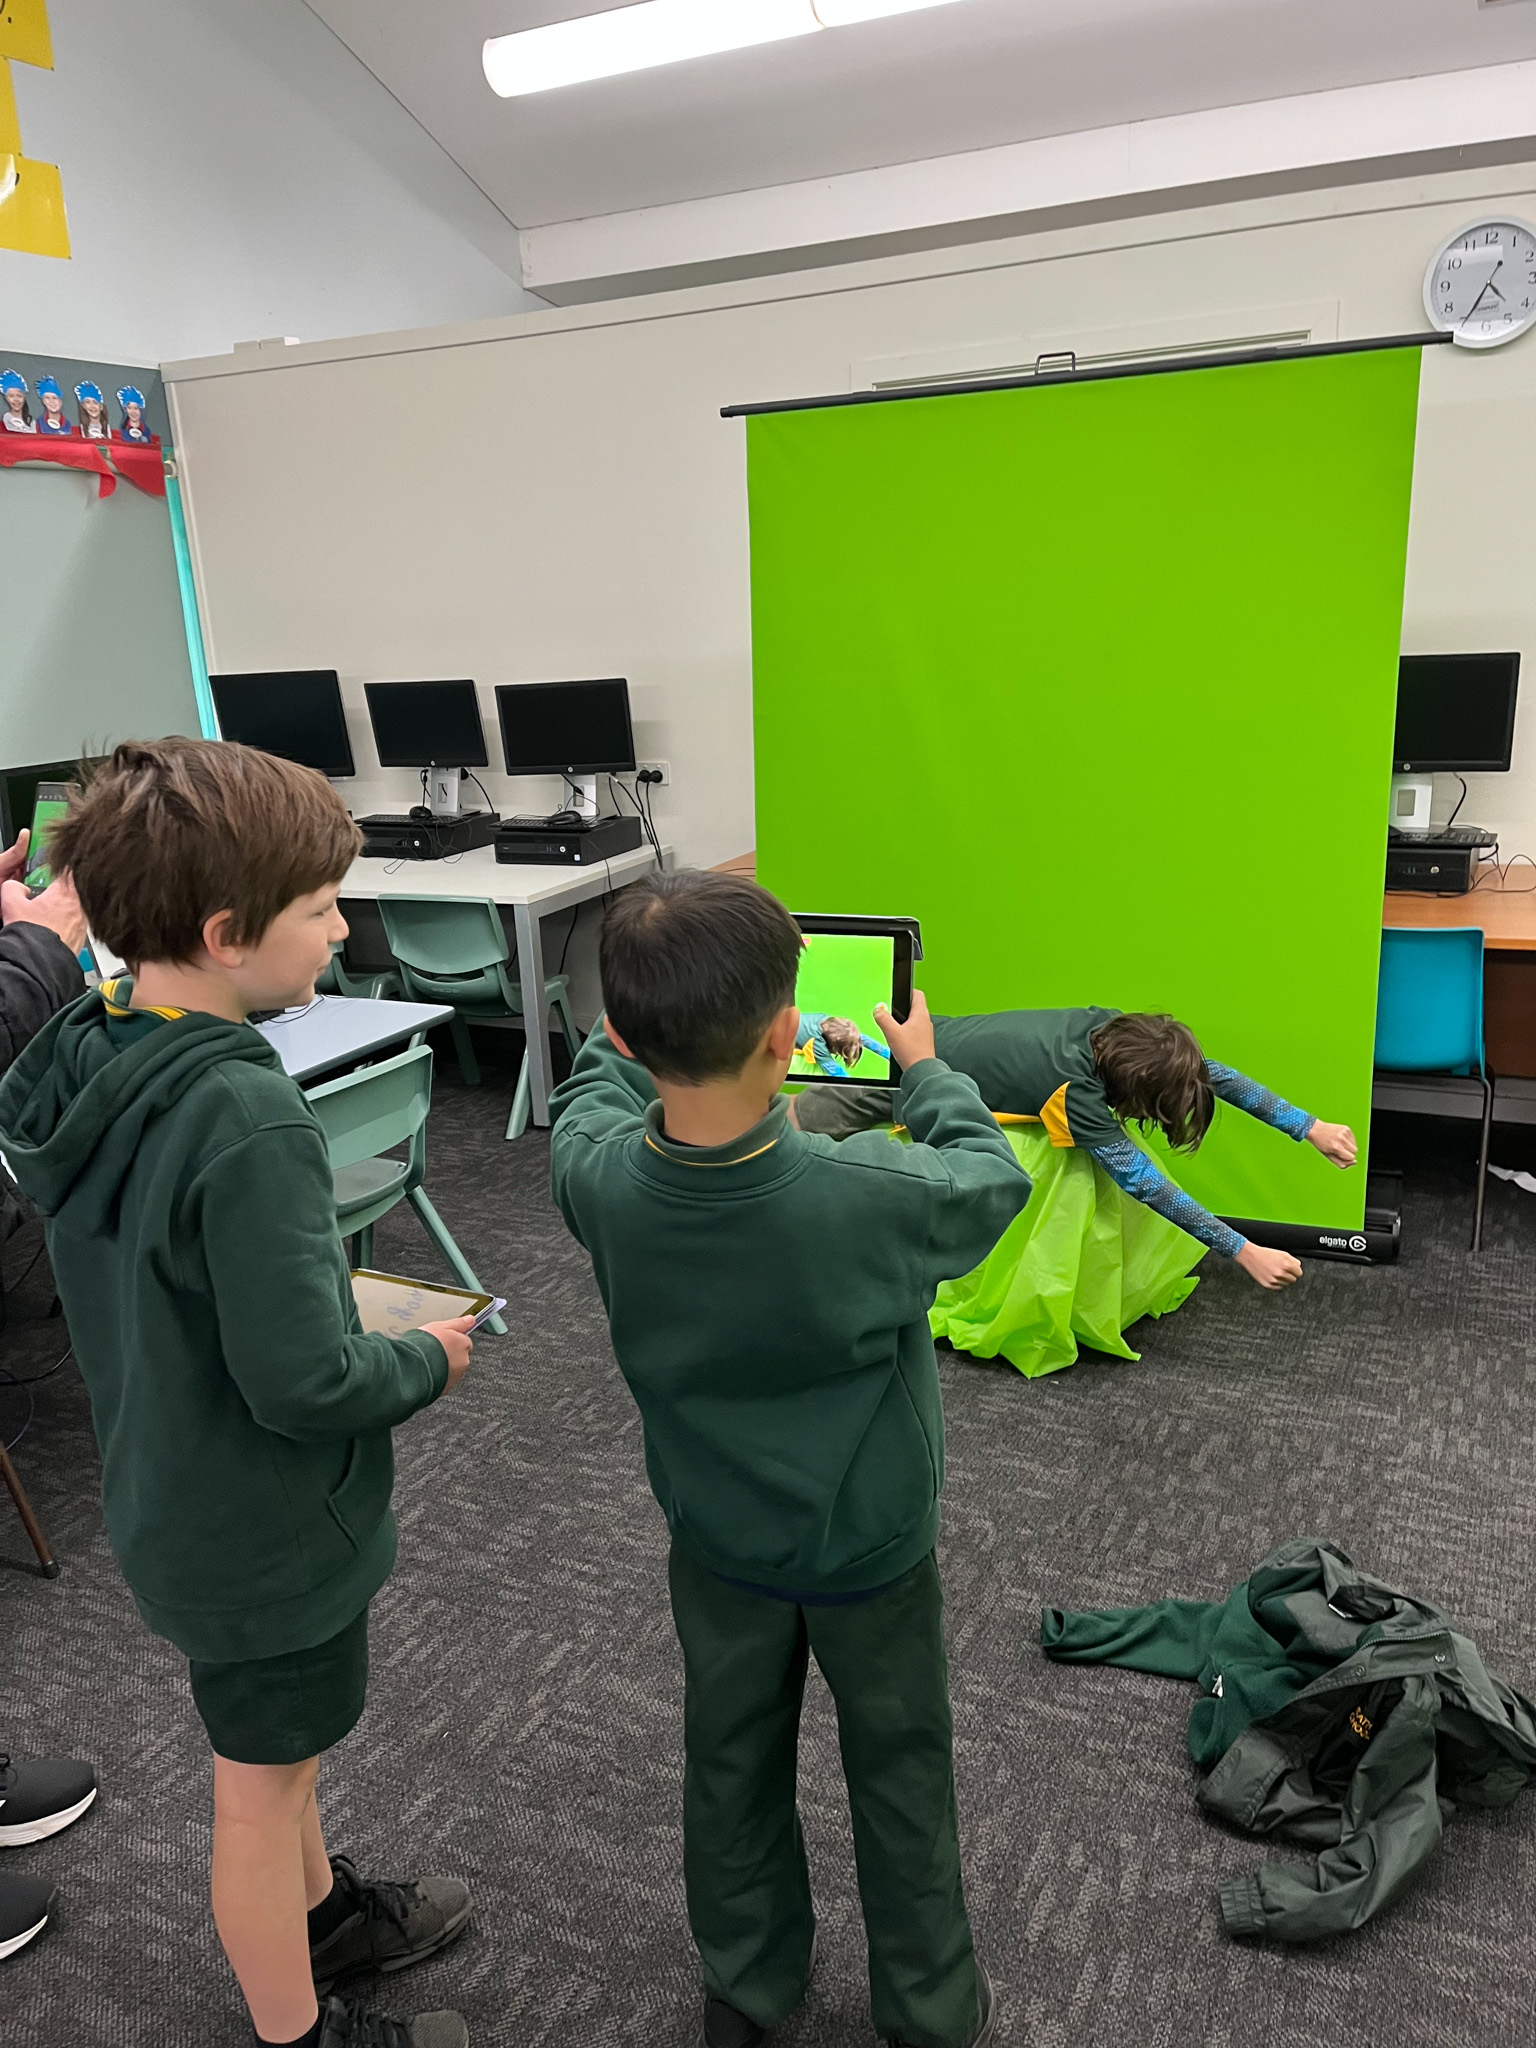 A boy using an iPad to film a scene in front of a green screen. Other students look on.